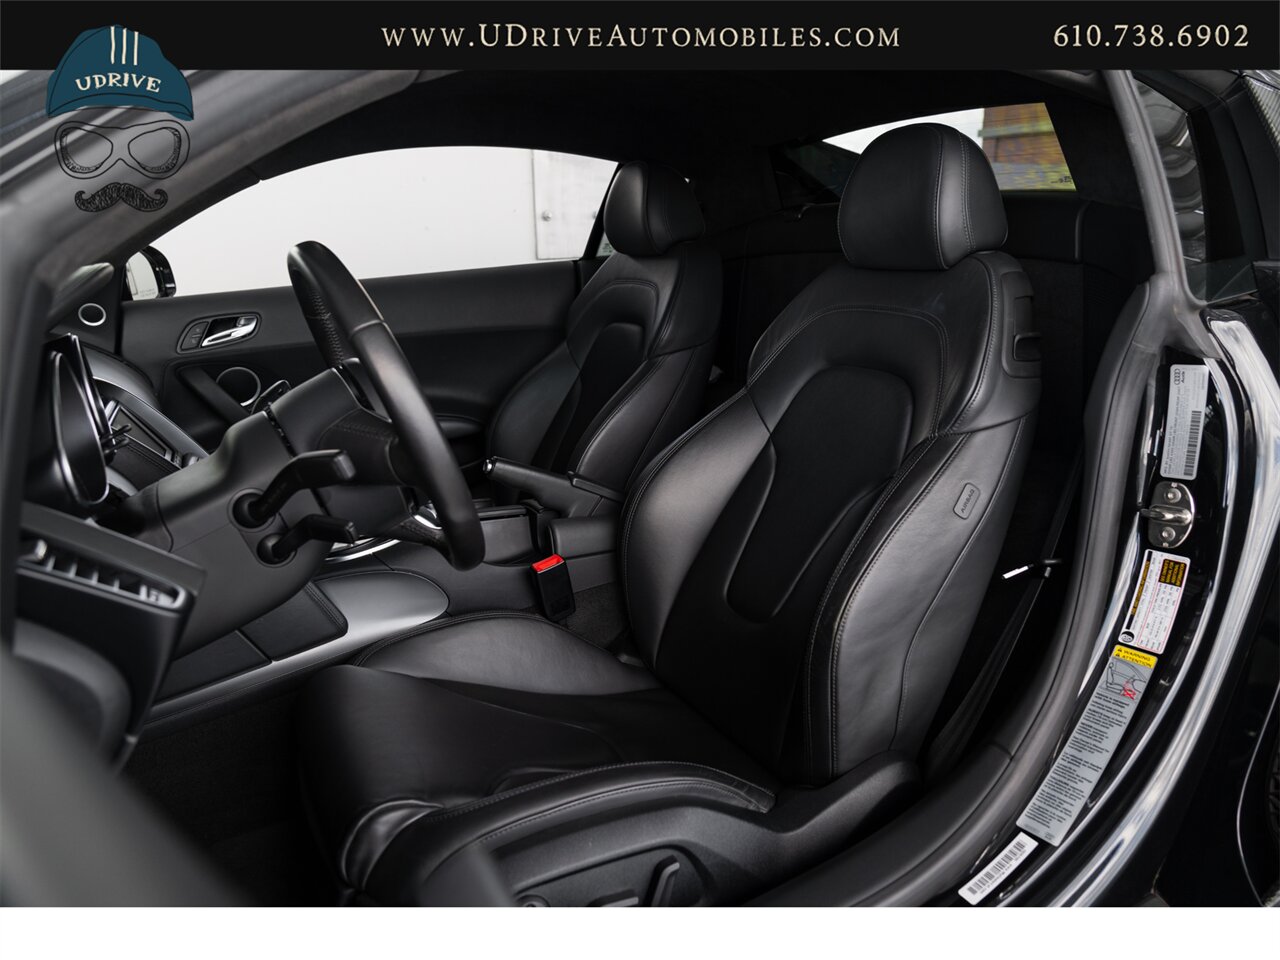 2011 Audi R8 5.2 Quattro  V10 6 Speed Manual - Photo 6 - West Chester, PA 19382